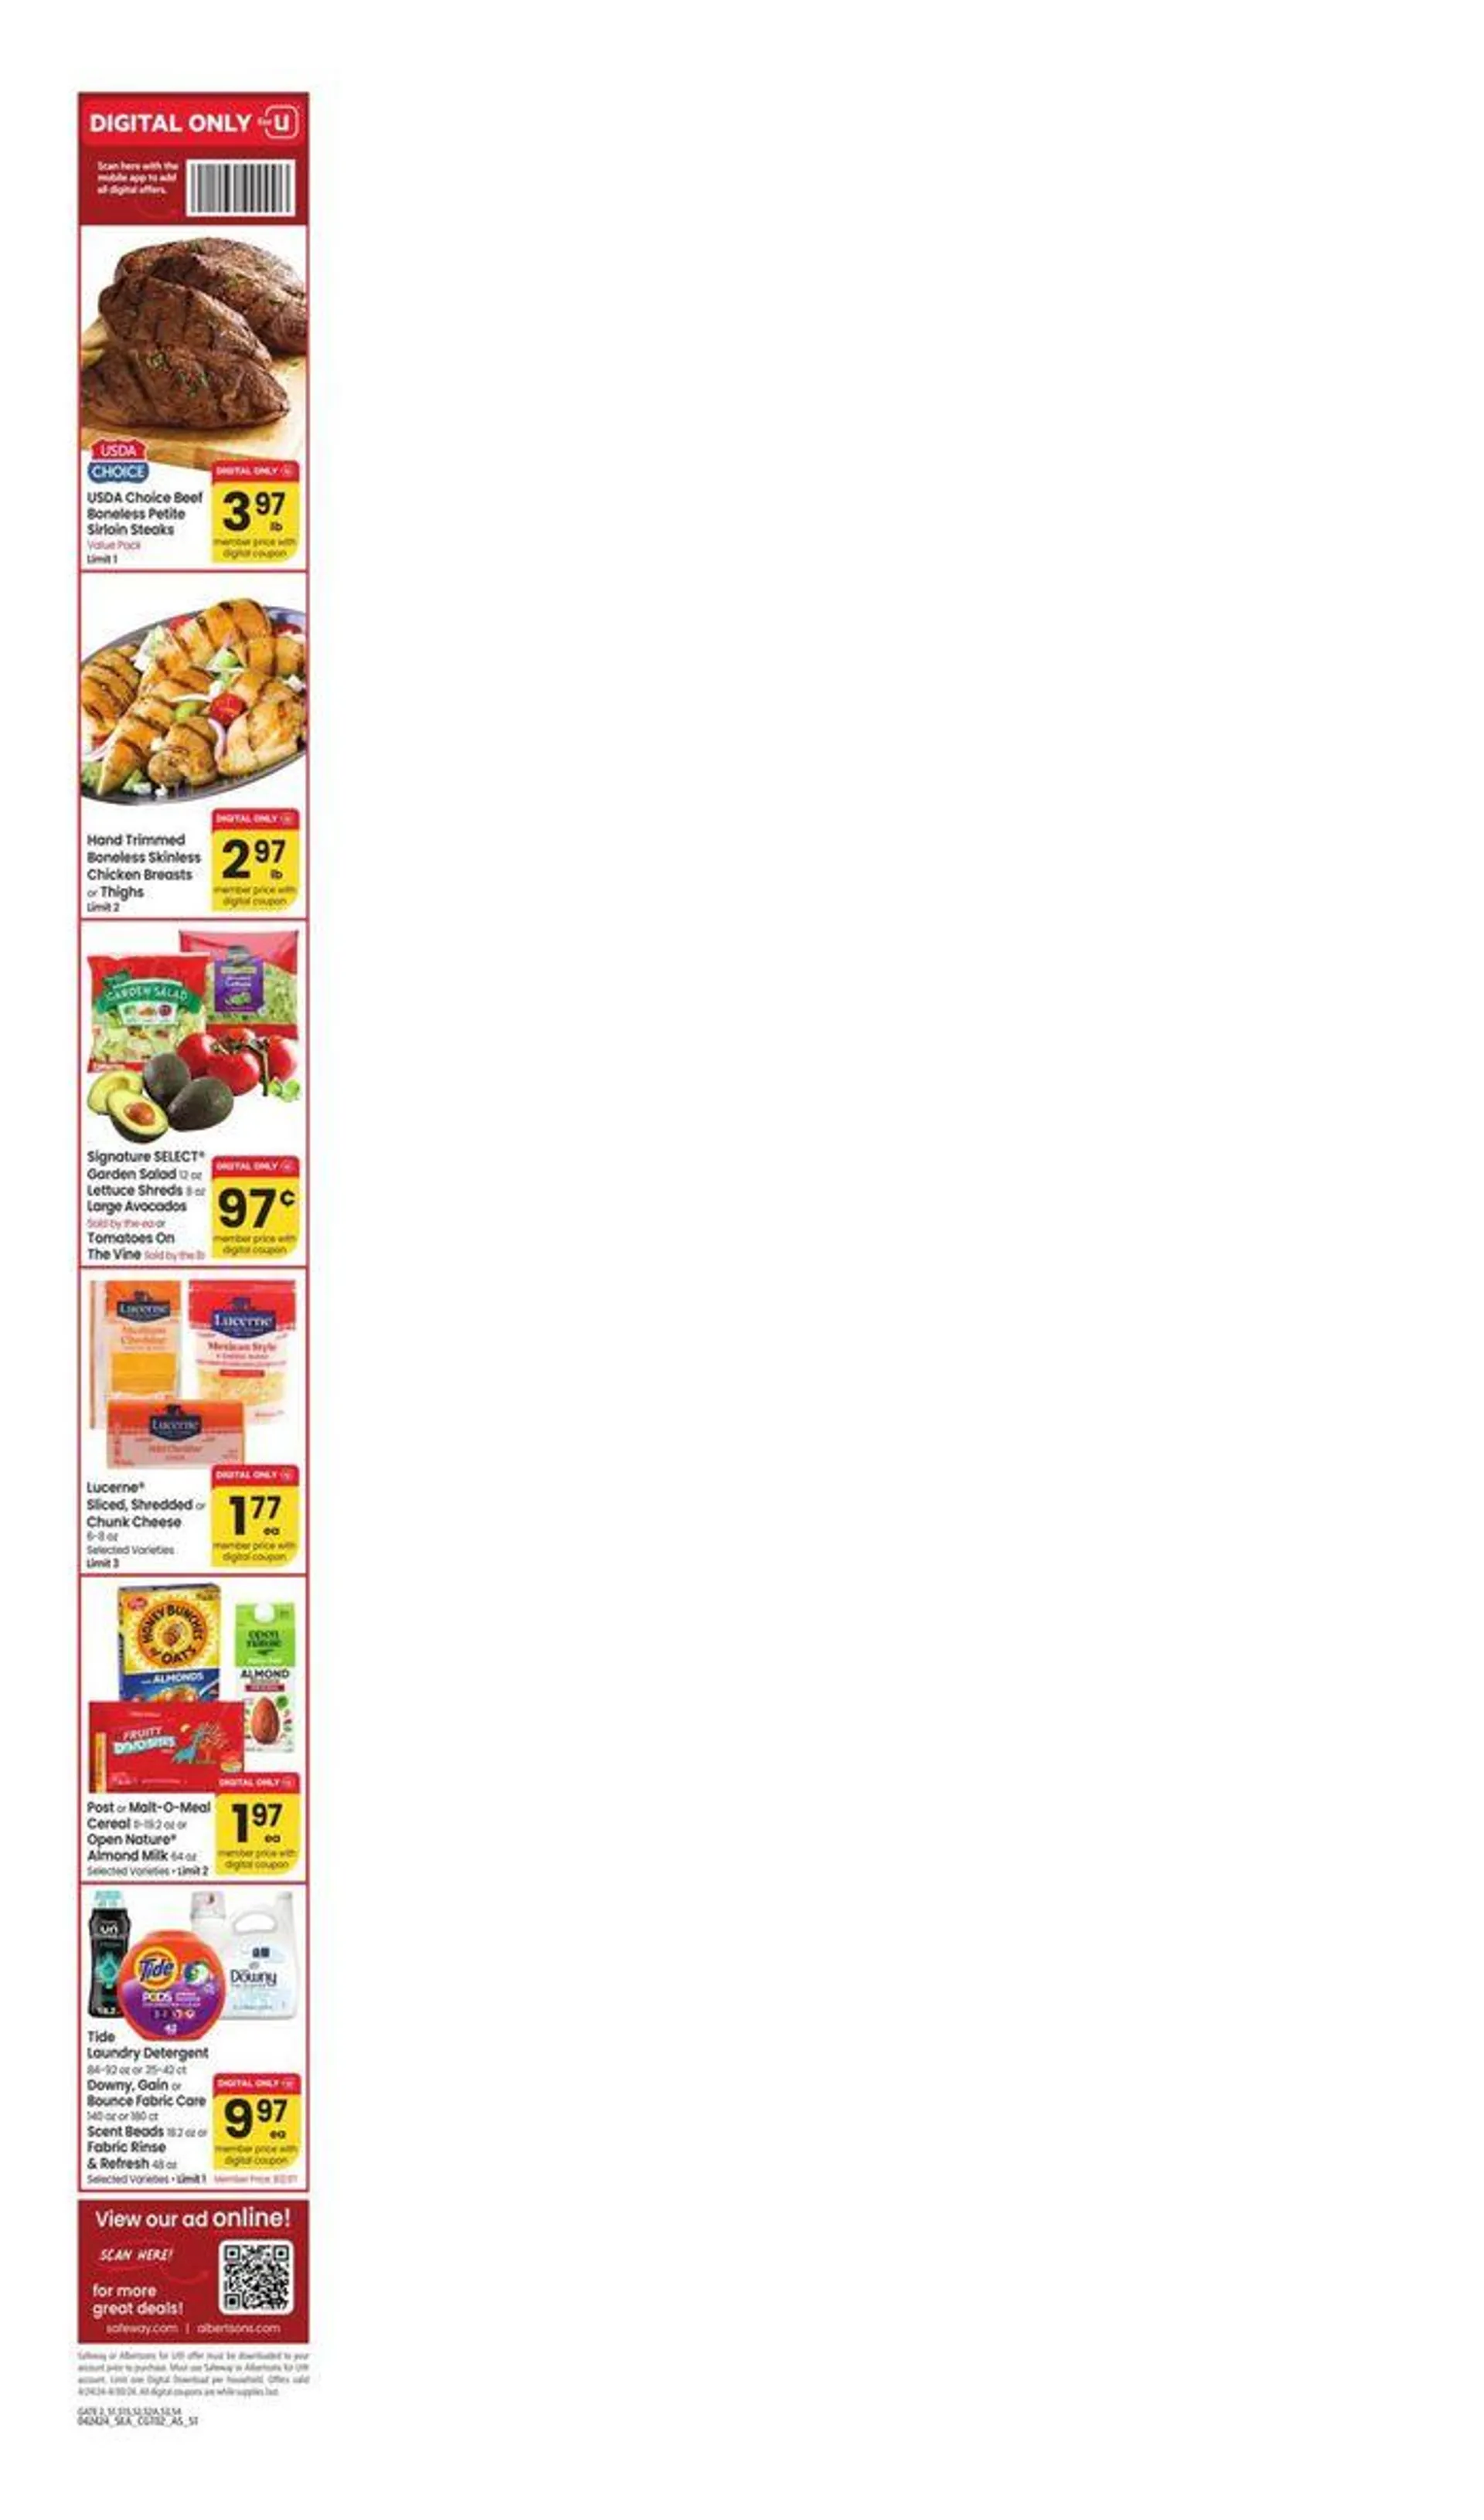 Weekly Ad - Albertsons - Seattle - 2